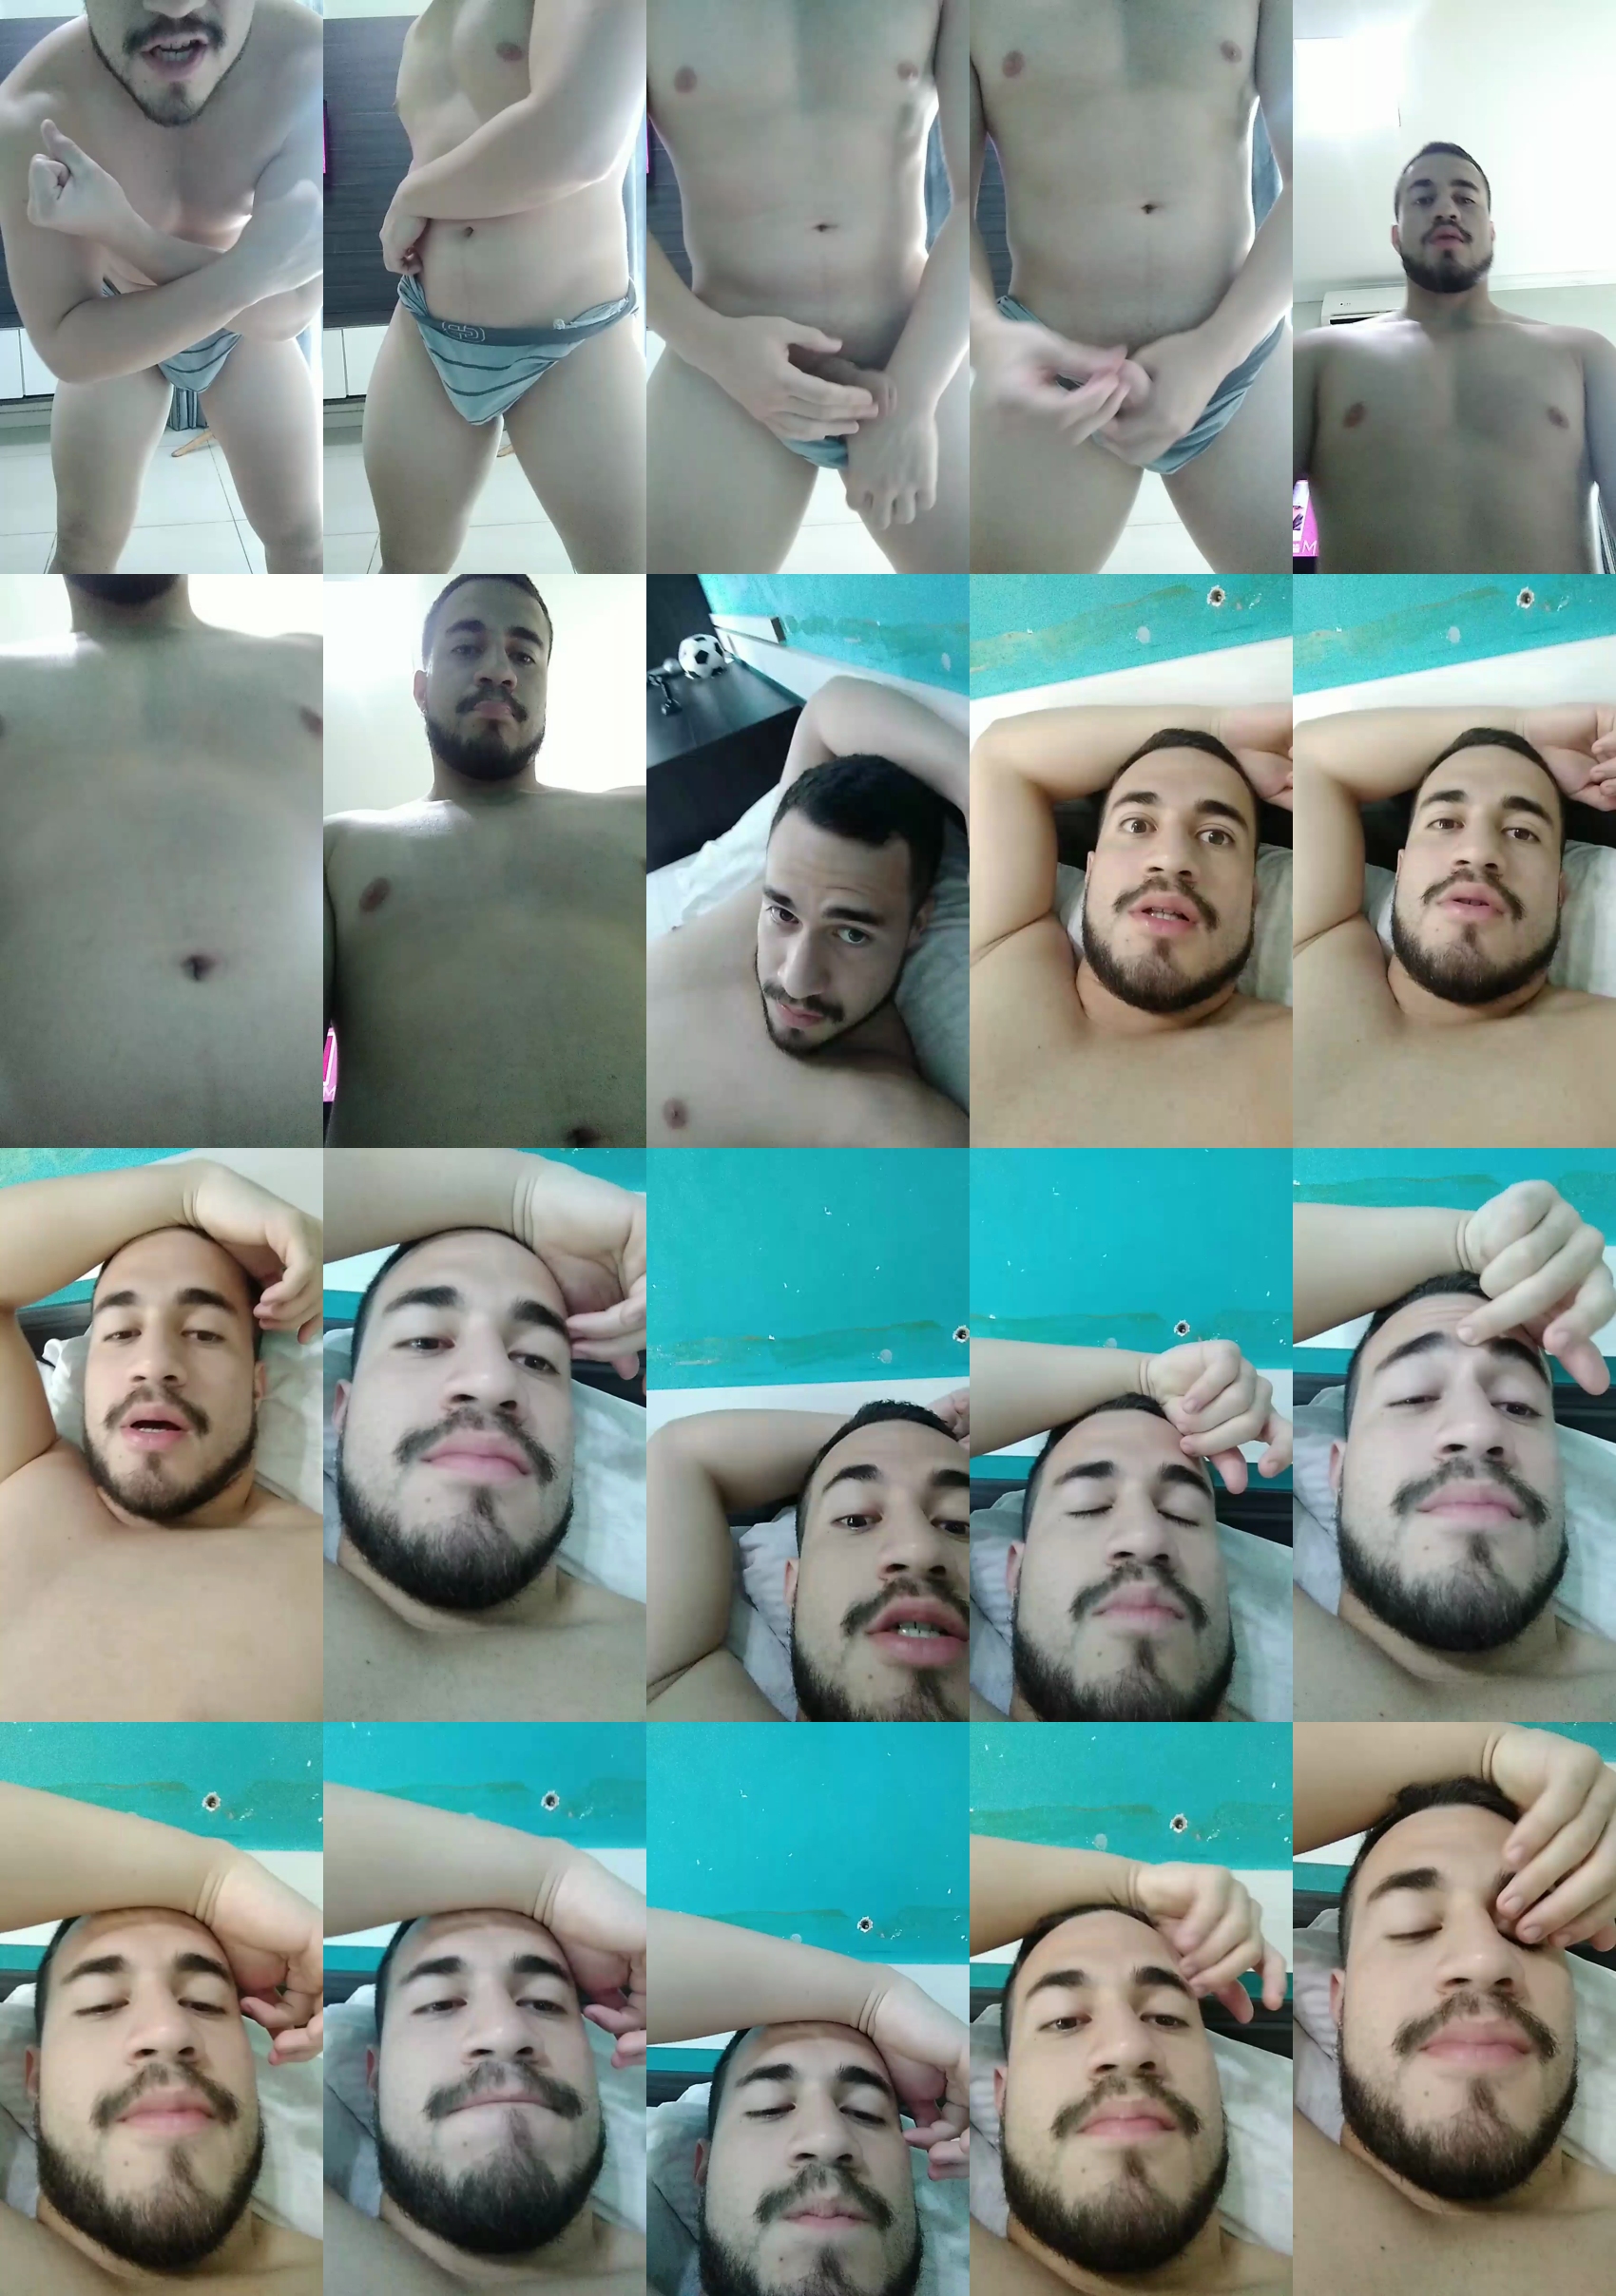 Jbd98  02-08-2022 Recorded Video naked